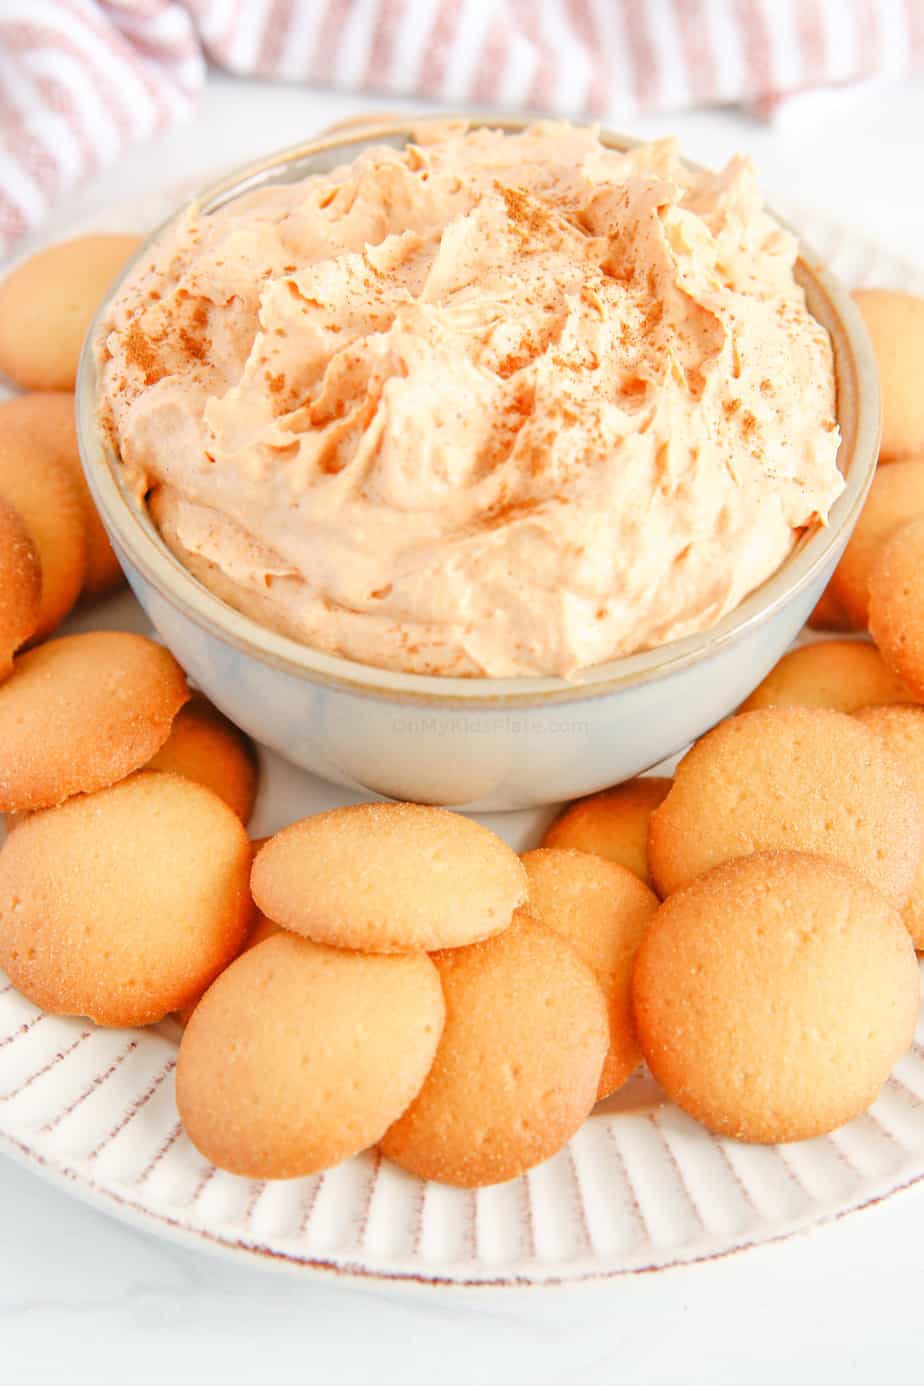 Light orange creamy dip in a bowl on a plate surrounded by round cookies